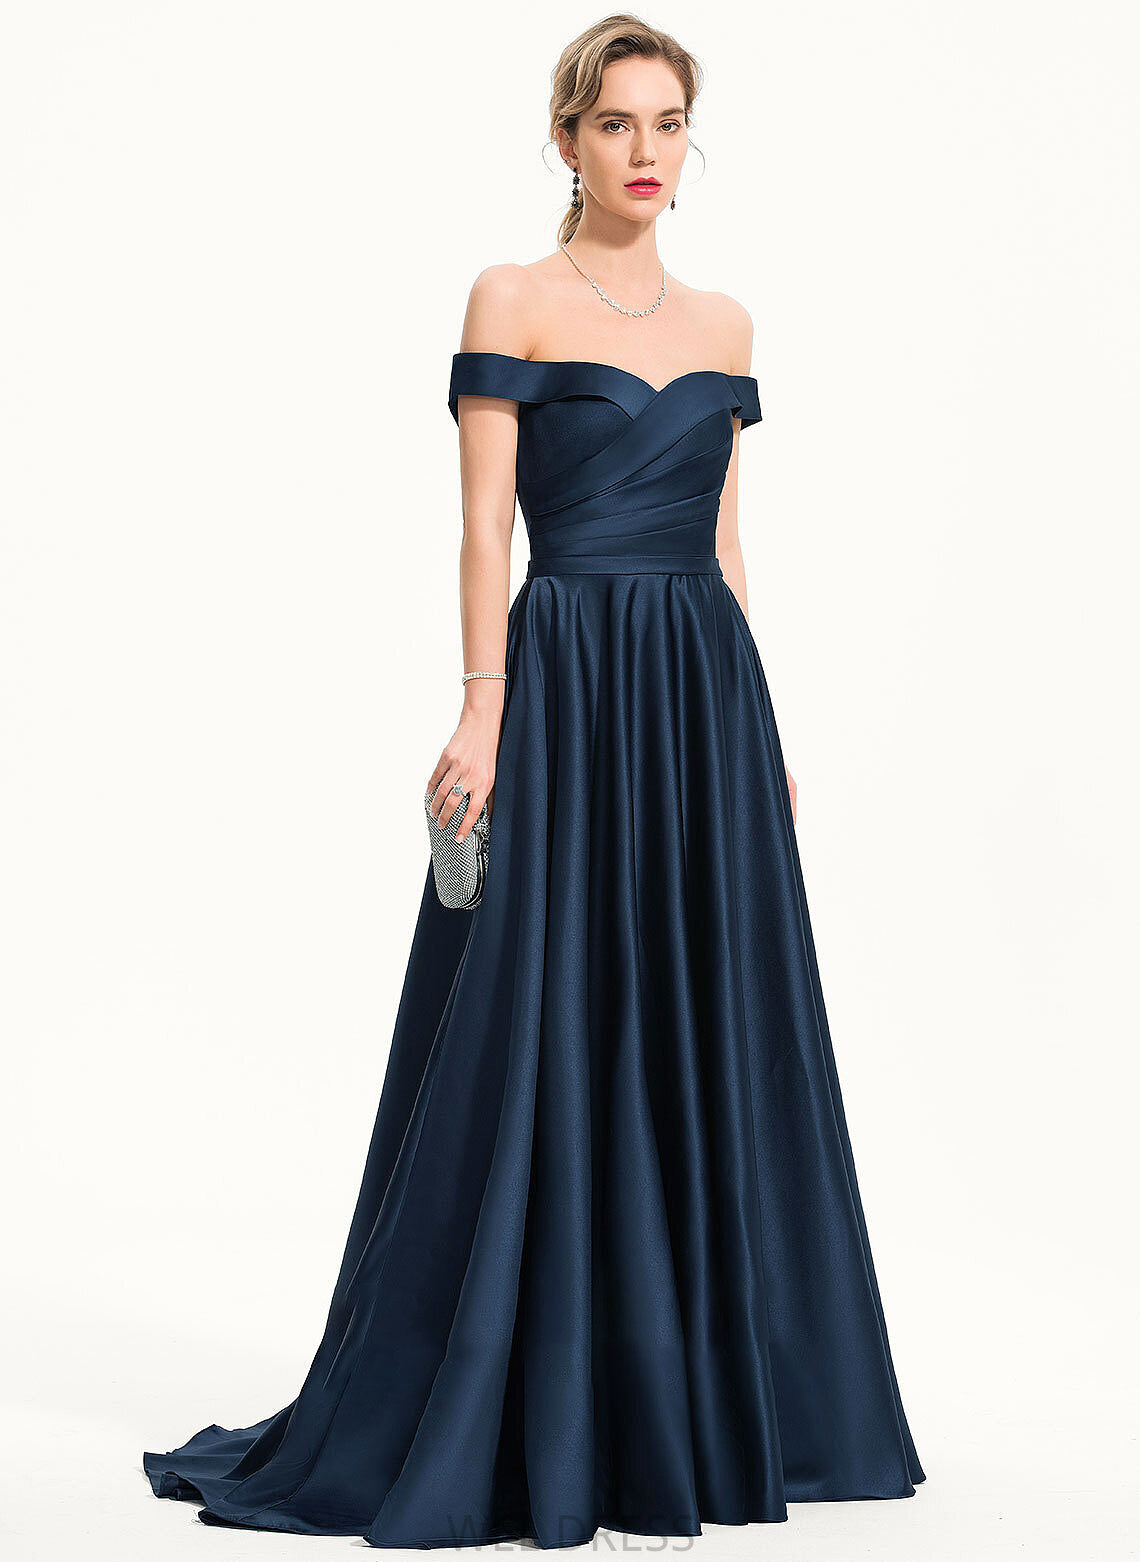 Satin With Sweep Off-the-Shoulder Train A-Line Shayla Pockets Prom Dresses